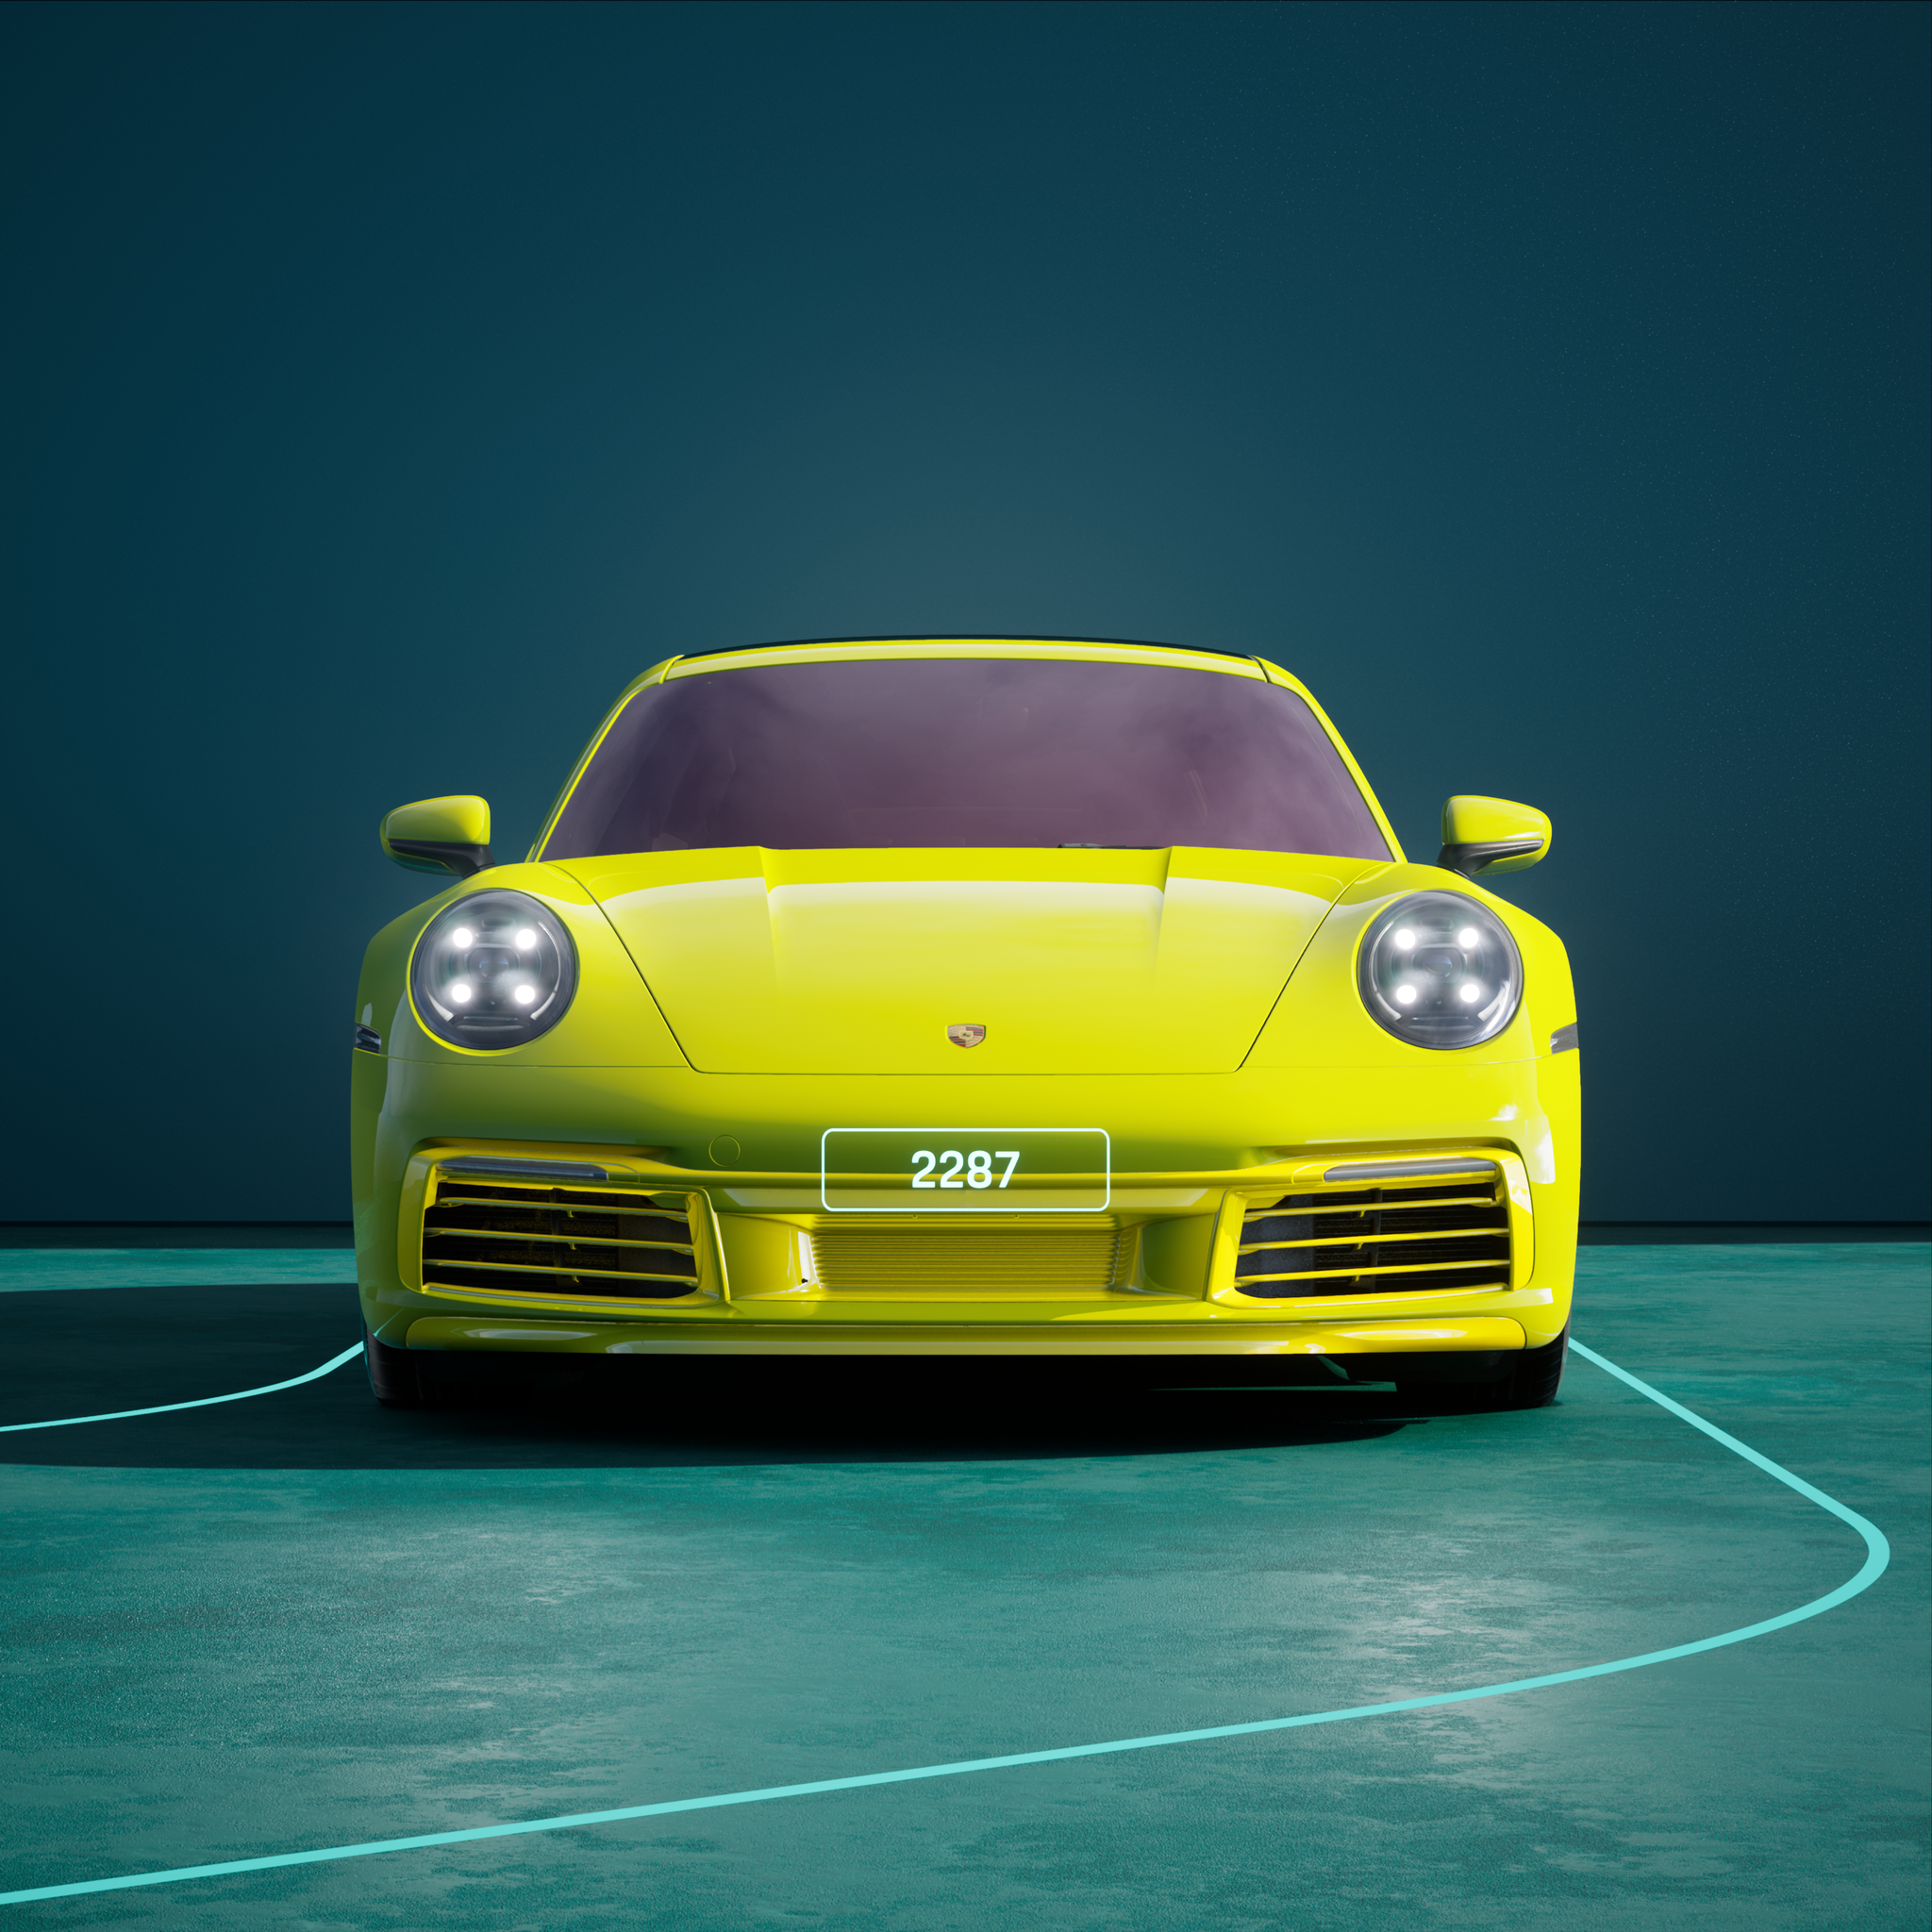 The PORSCHΞ 911 2287 image in phase